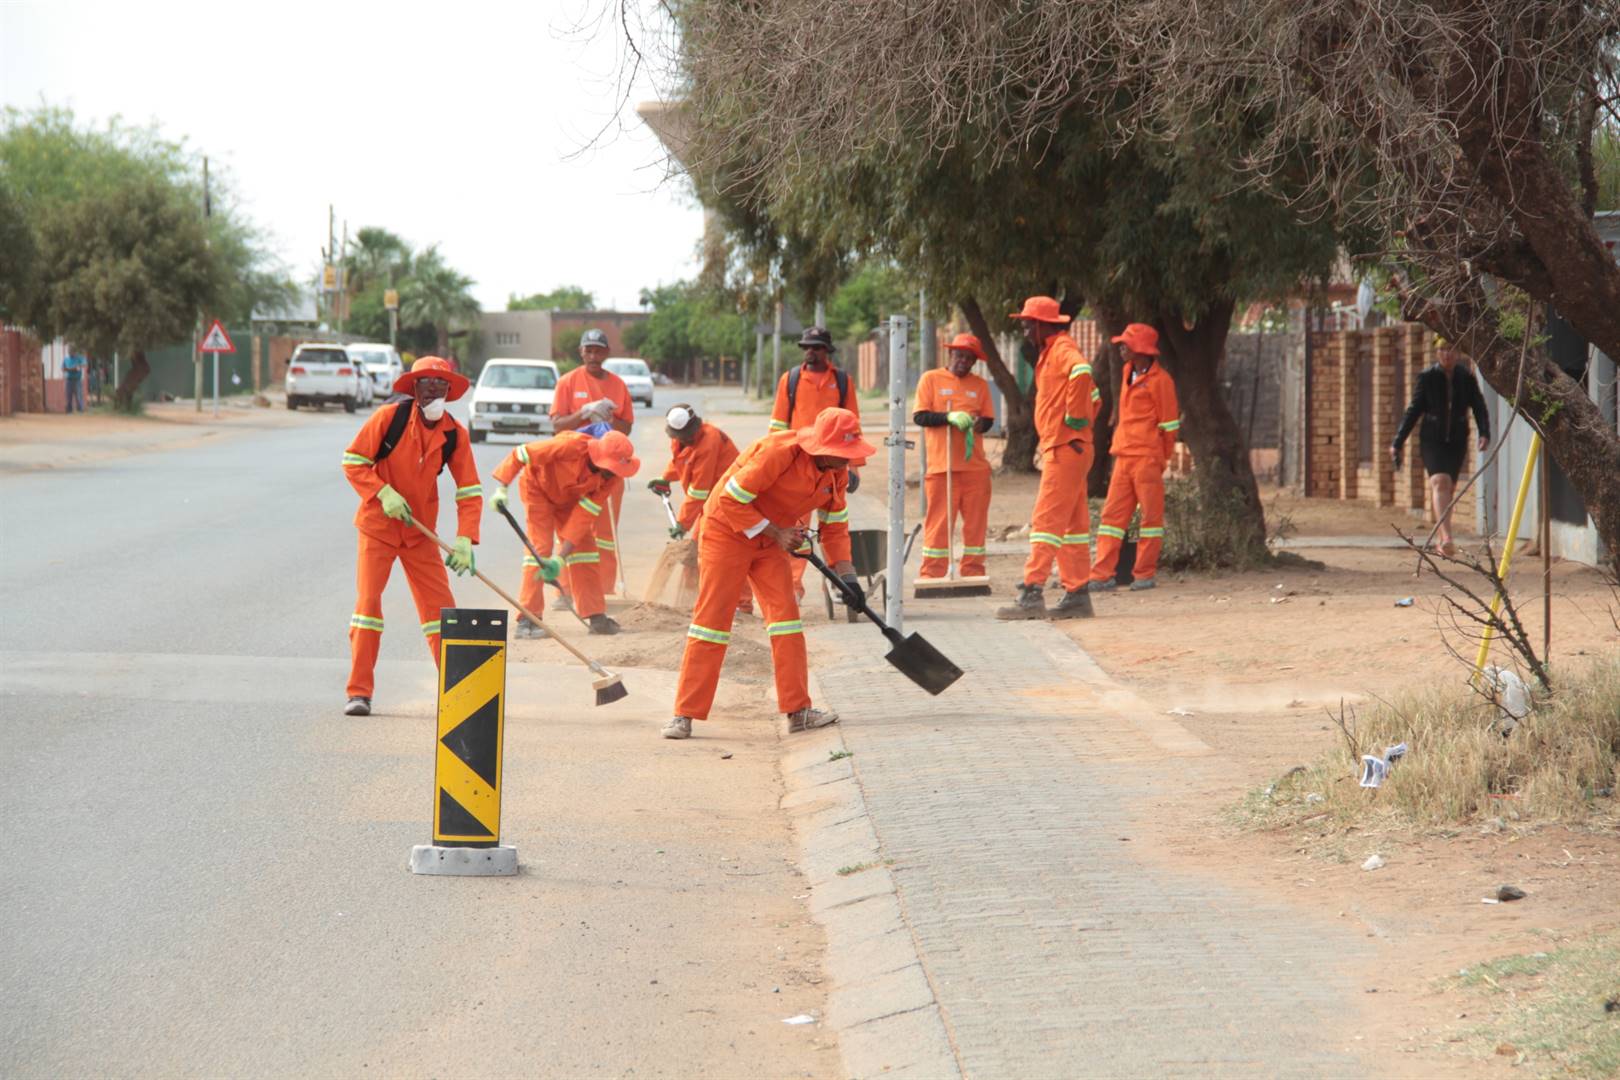 Over 3500 workers who are part of the Public Employment Programme are set to lose their jobs after the eThekwini municipality announced that its budget has been slashed.